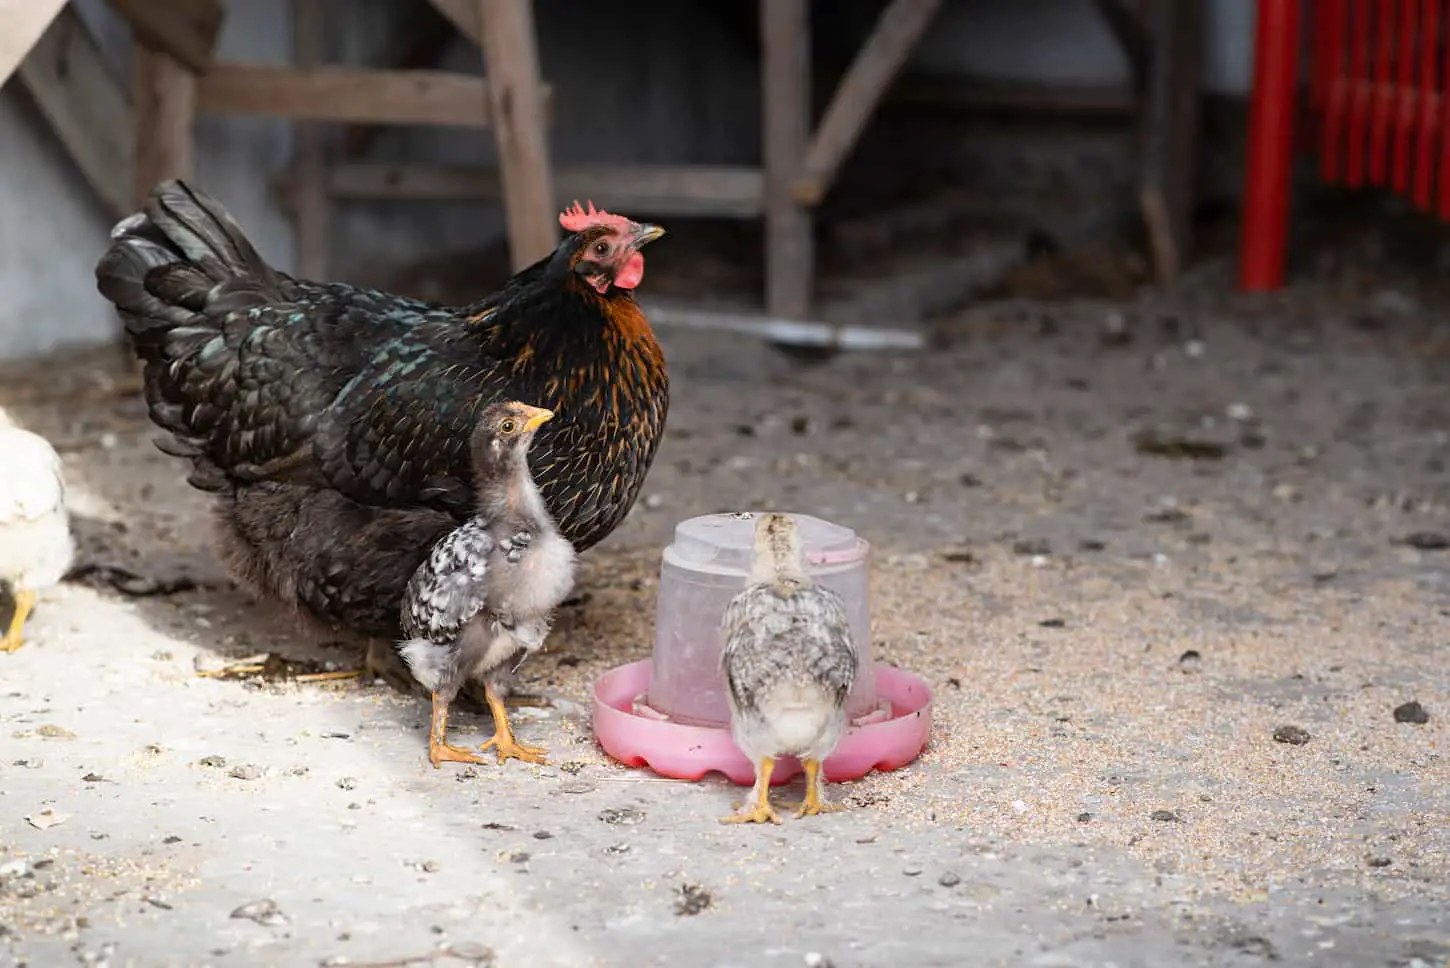 An image of a Broody hen with chickens drinking water from a drinking bowl.